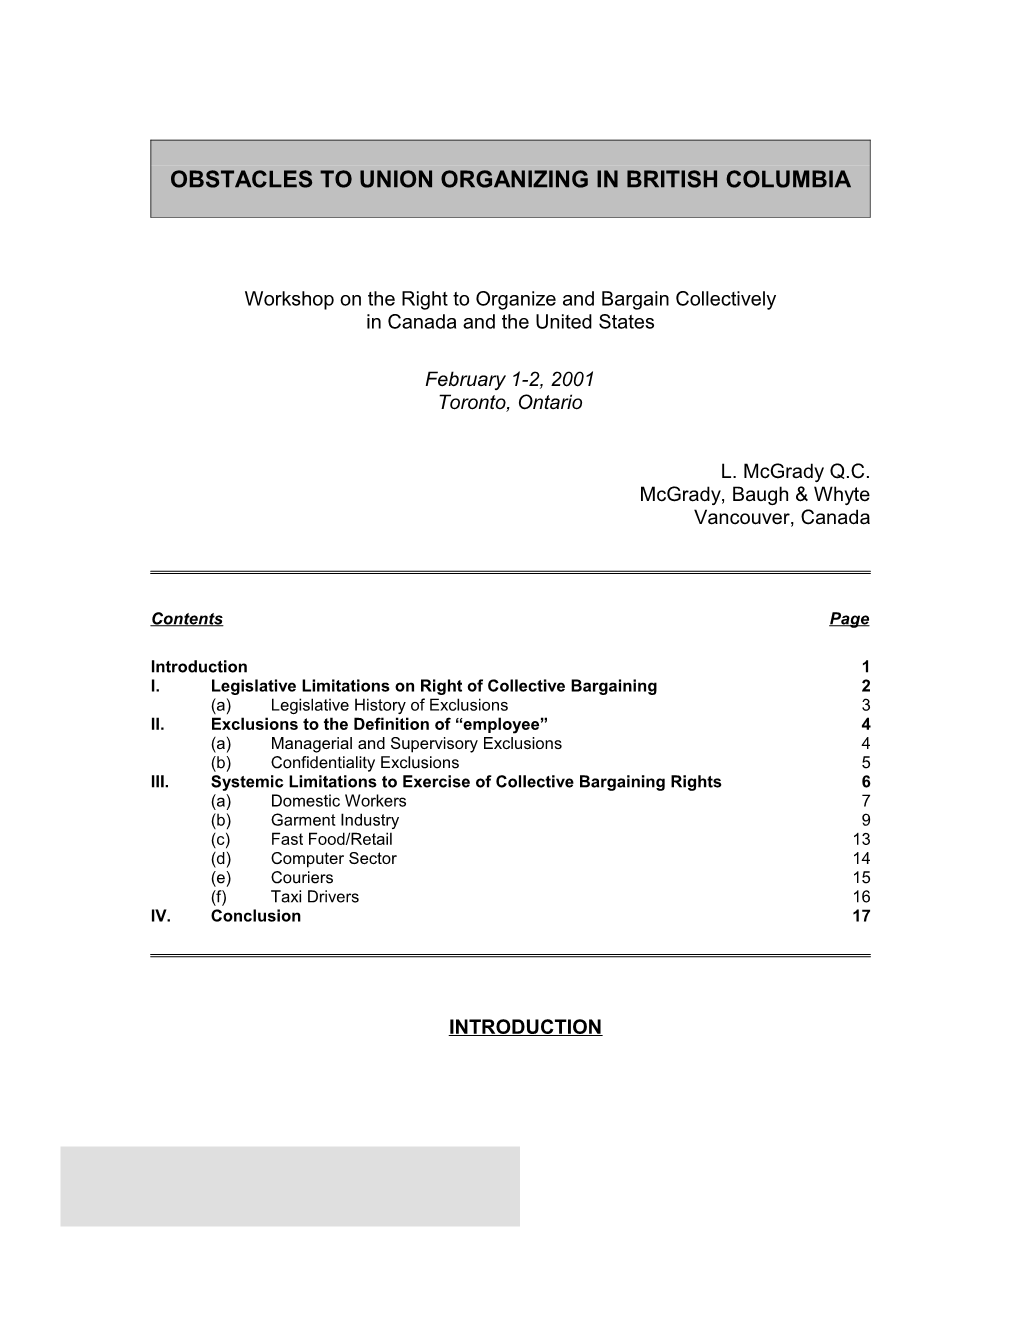 Obstacles to Union Organizing in British Columbia